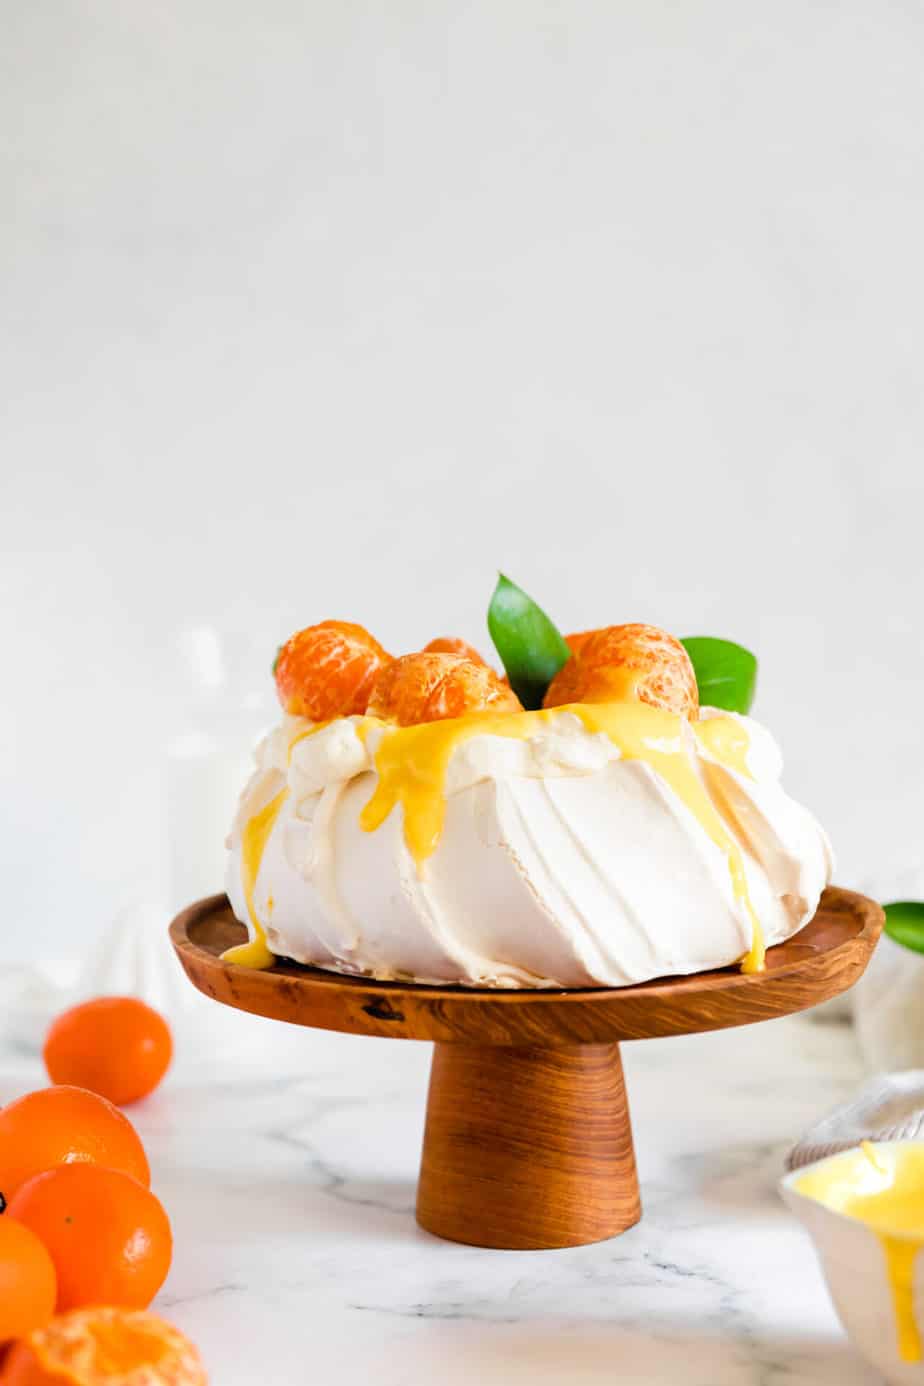 Clementine winter pavlova with curd and whipped cream on a wooden cake stand.